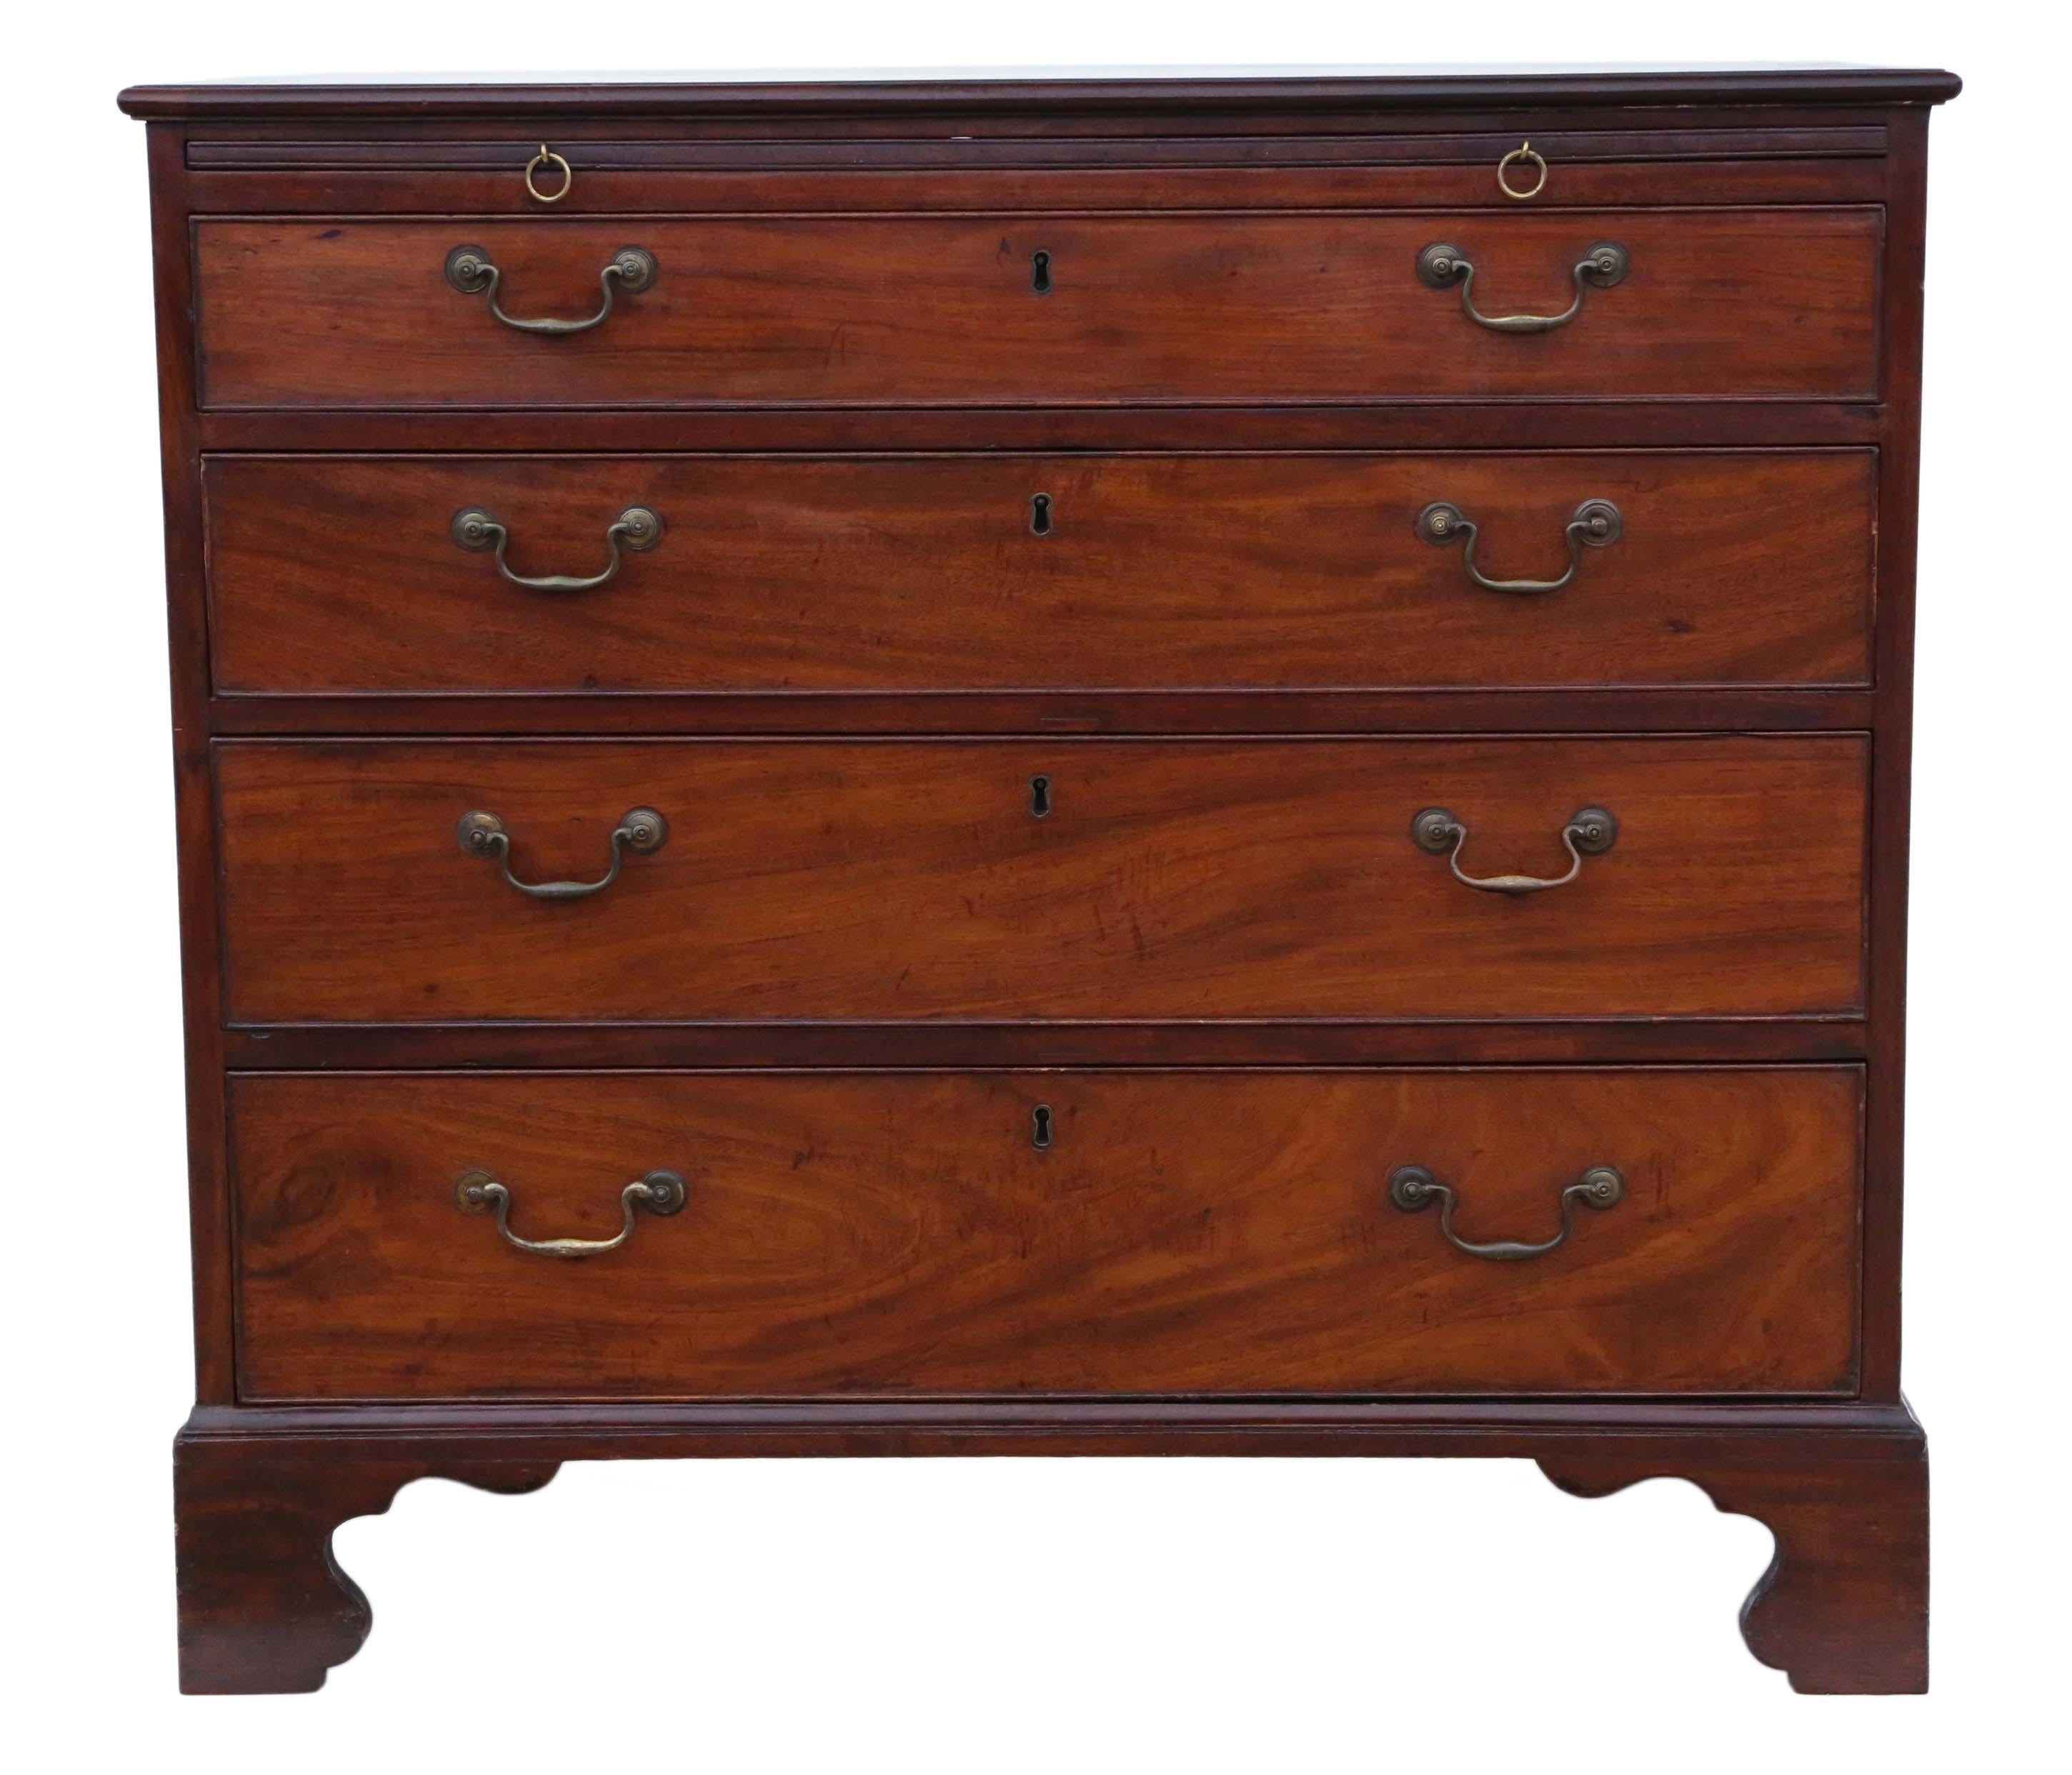 Georgian circa 1780 mahogany chest of drawers with brushing slide. A top quality chest of drawers that has been recently restored and re-polished to a high standard.
Solid and strong, with no loose joints. An absolutely charming rare find.
The oak